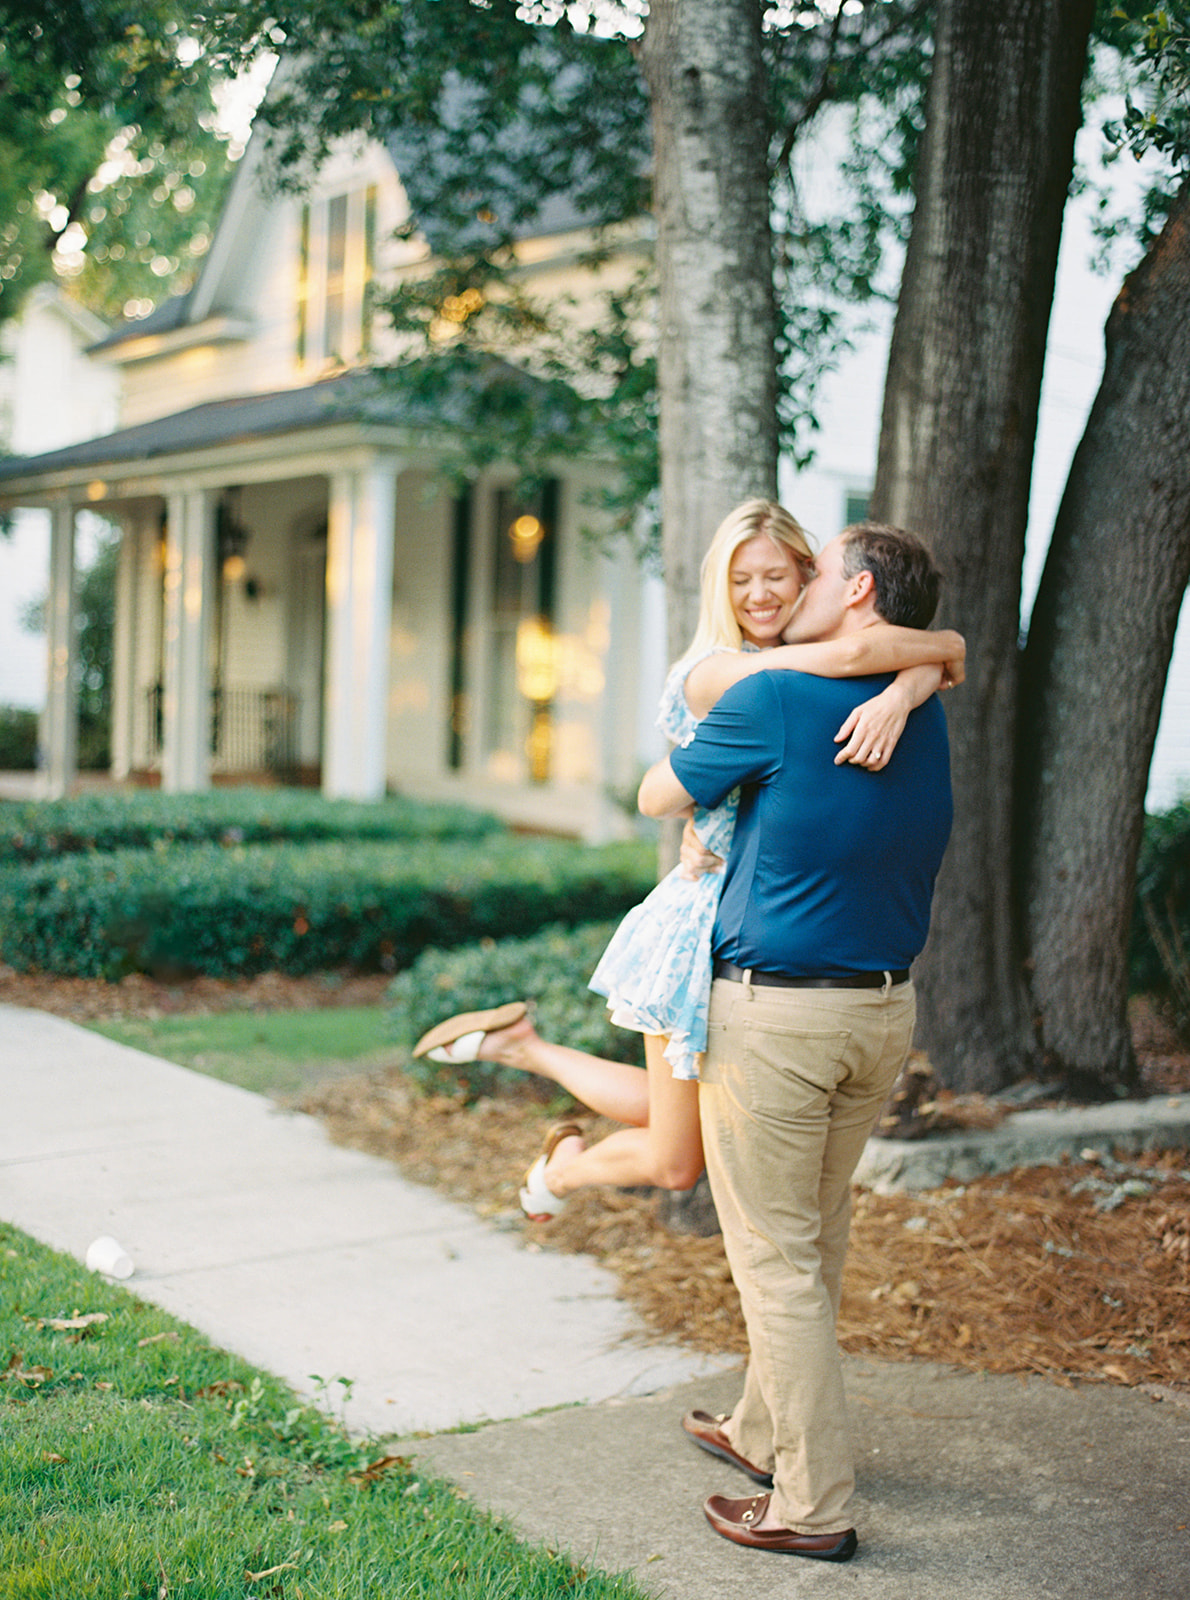 Engagement Session couple walking in downtown Thomasville, GA using Contax 645 camera.